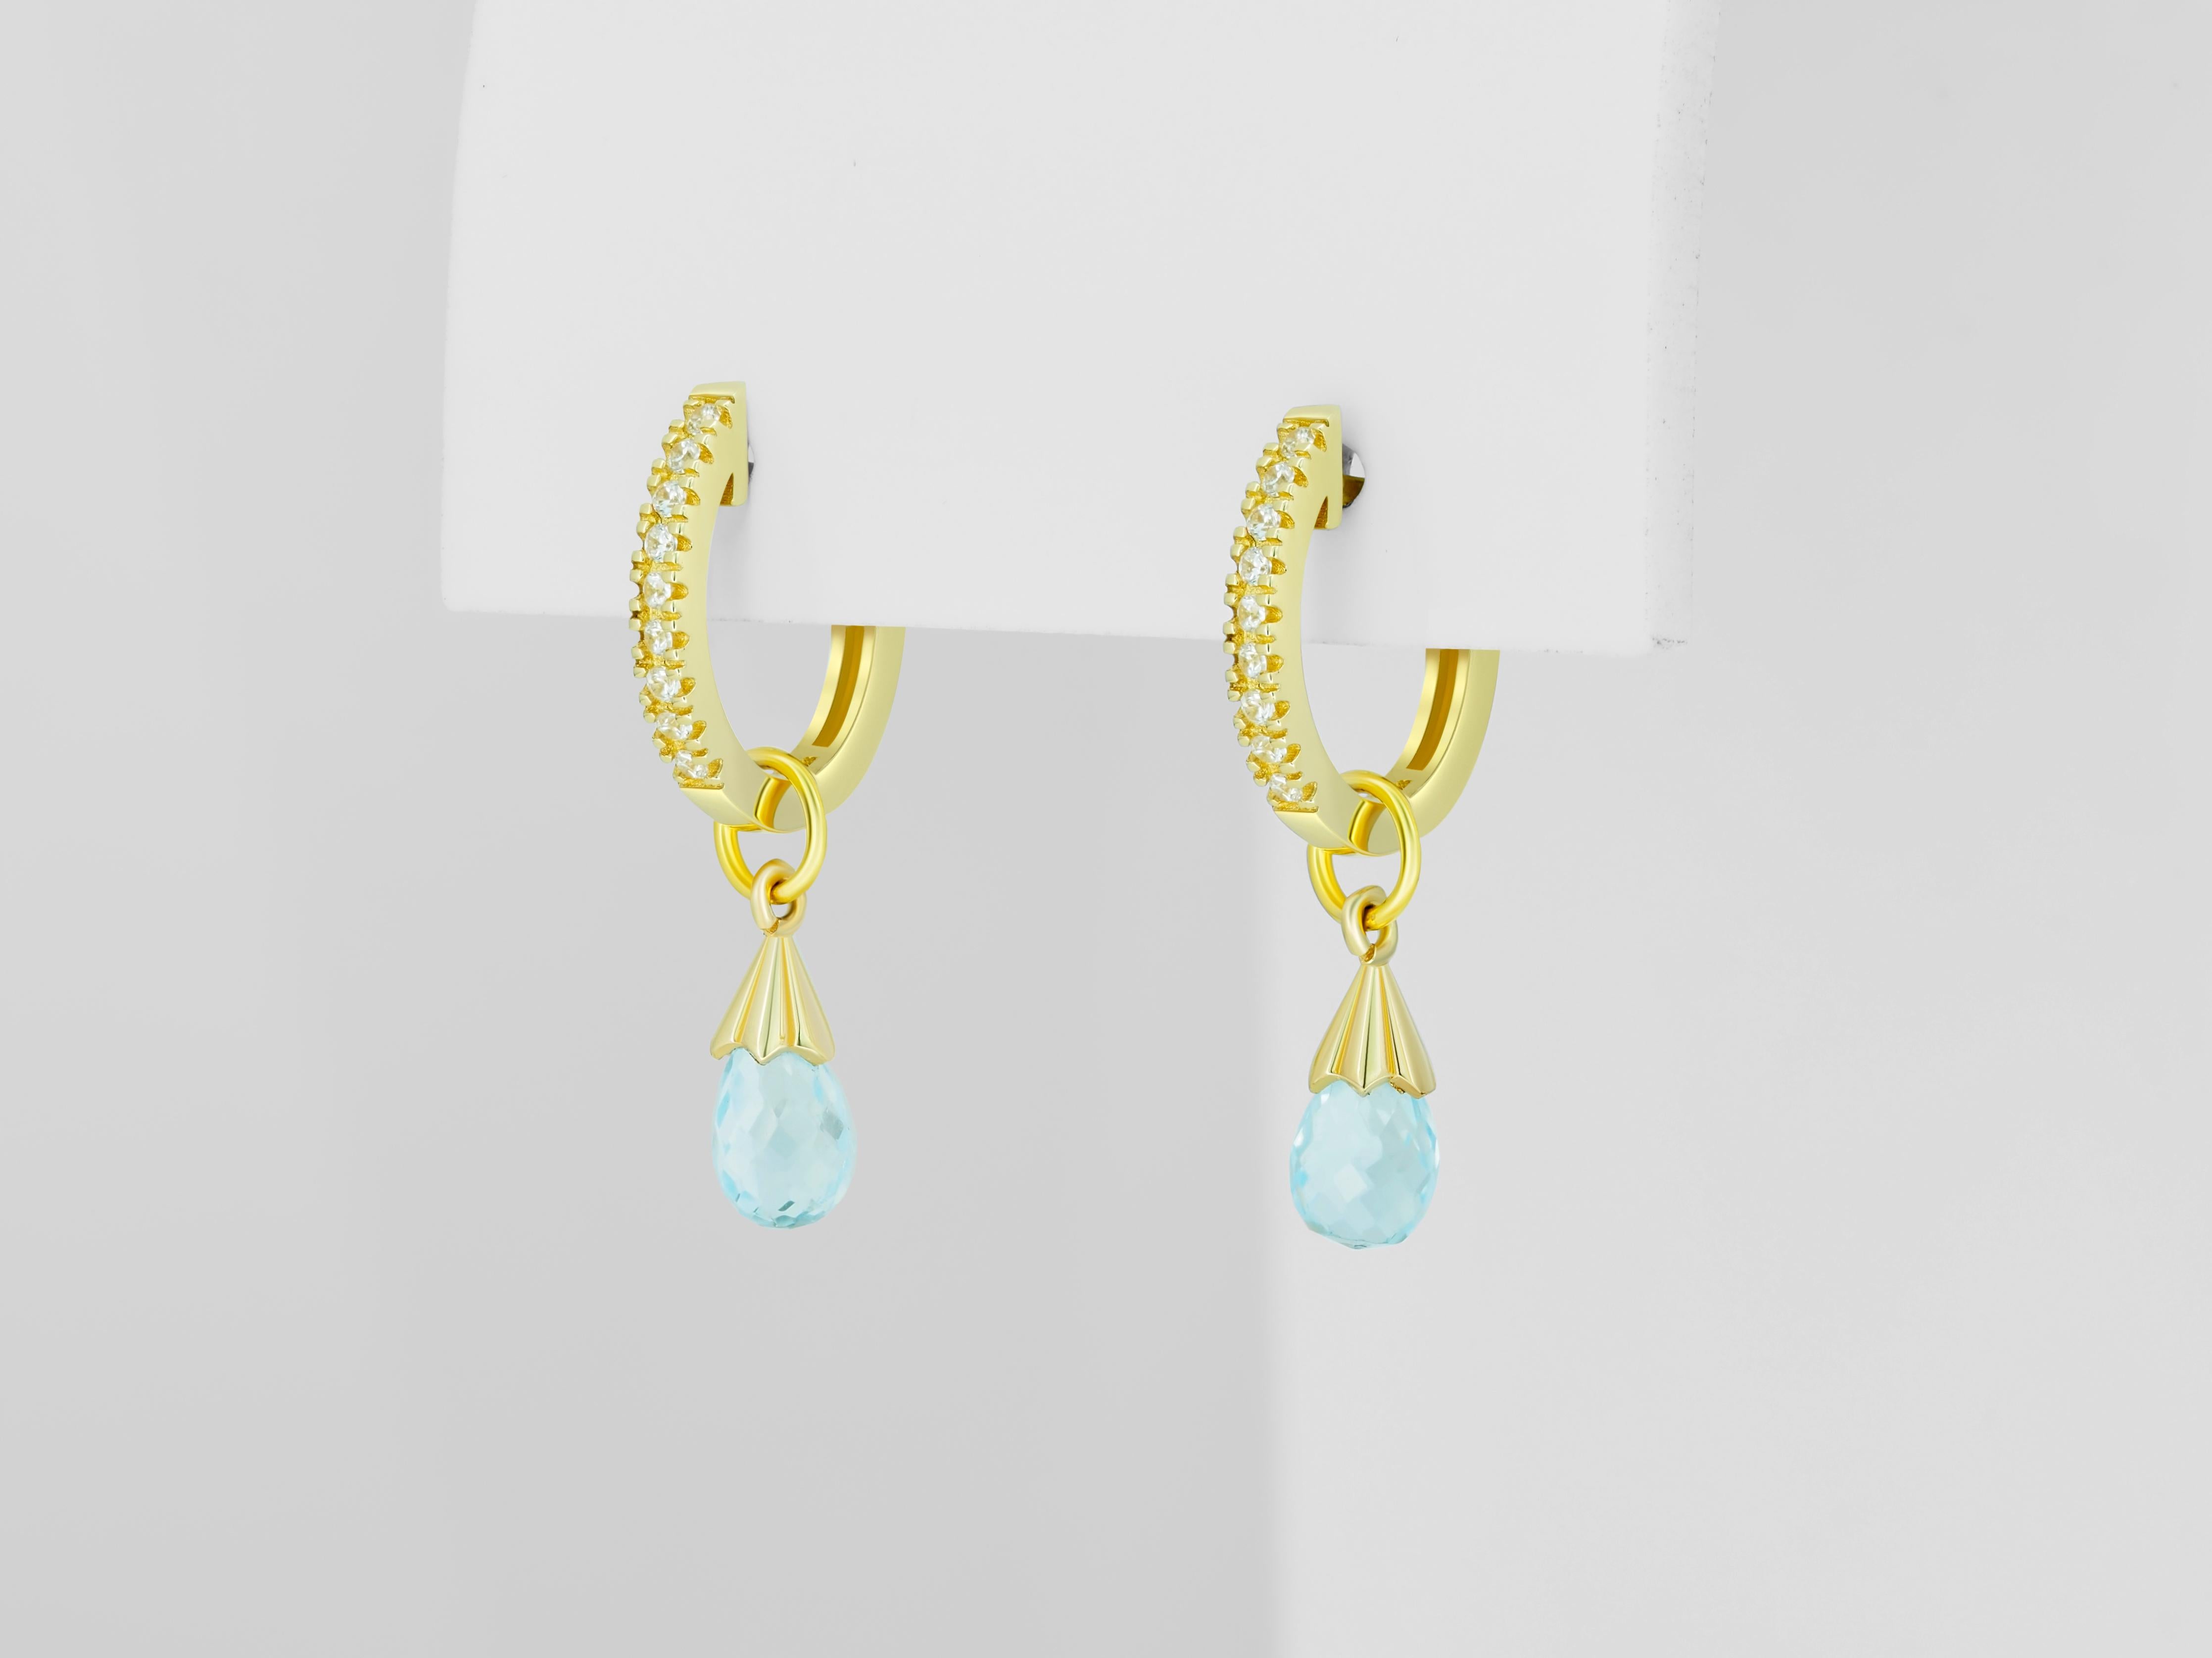 Diamond Hoop Earrings and Topaz Briolette Charms in 14k Gold For Sale 2